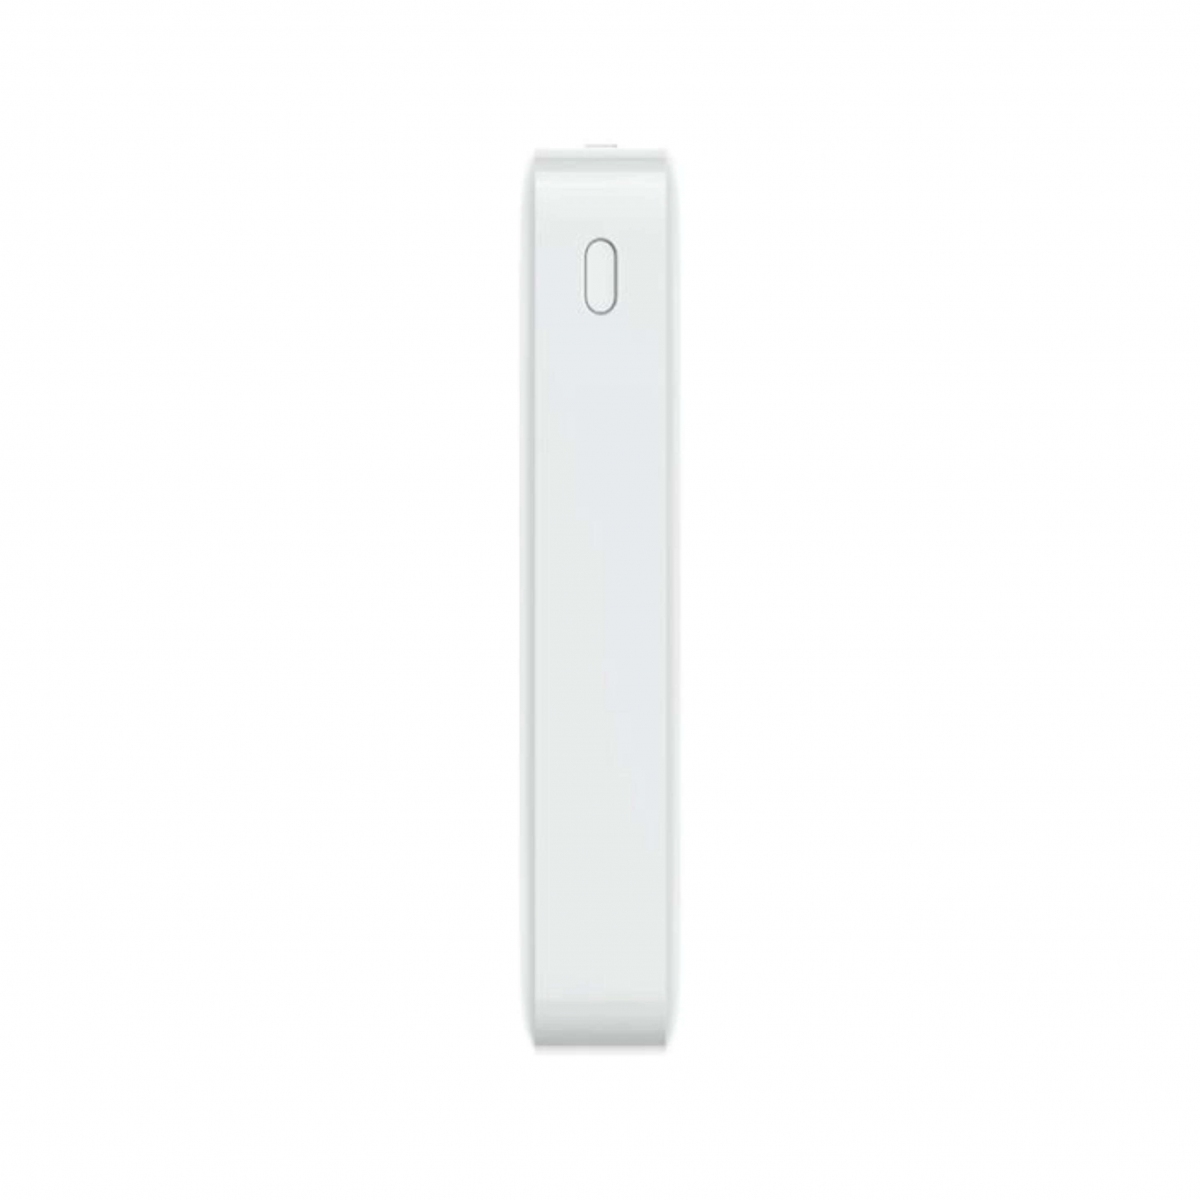 Redmi 18W Fast Charge Power Bank 20000mAh 2